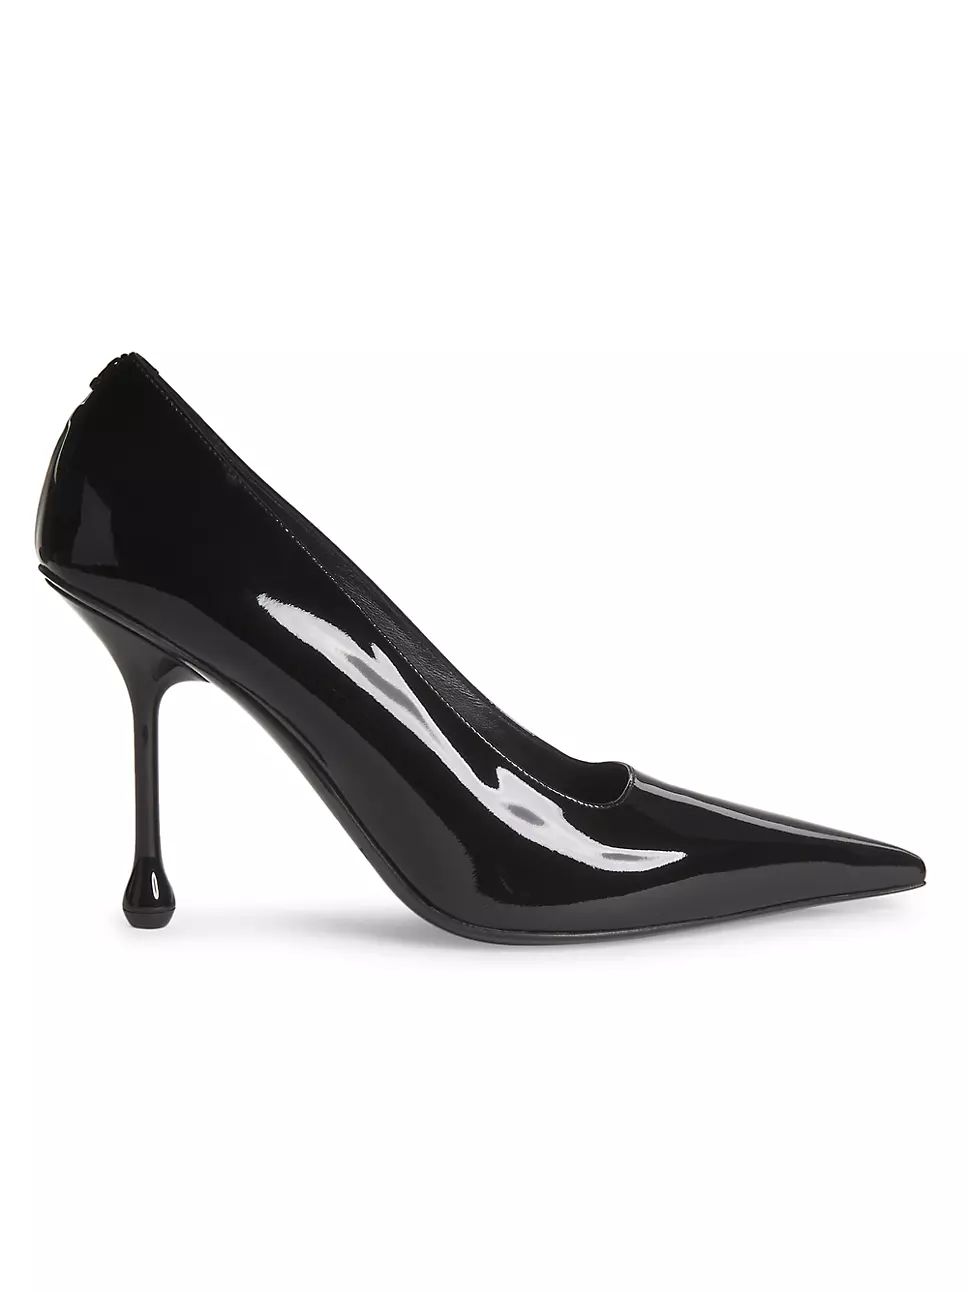 Ixia 95MM Patent Leather Pumps | Saks Fifth Avenue